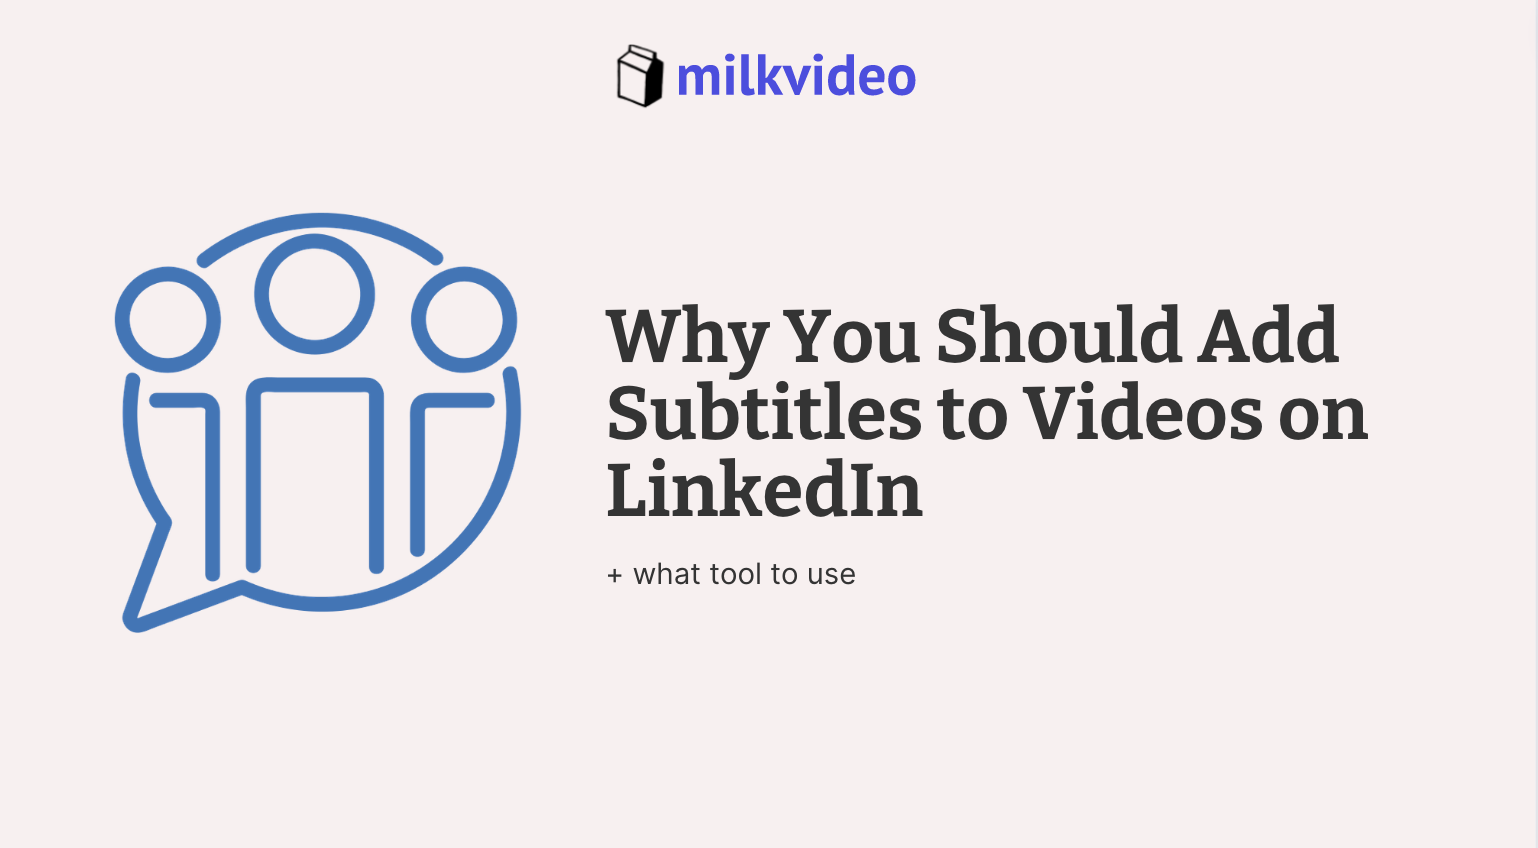 Why You Should Add Subtitles to Videos on LinkedIn